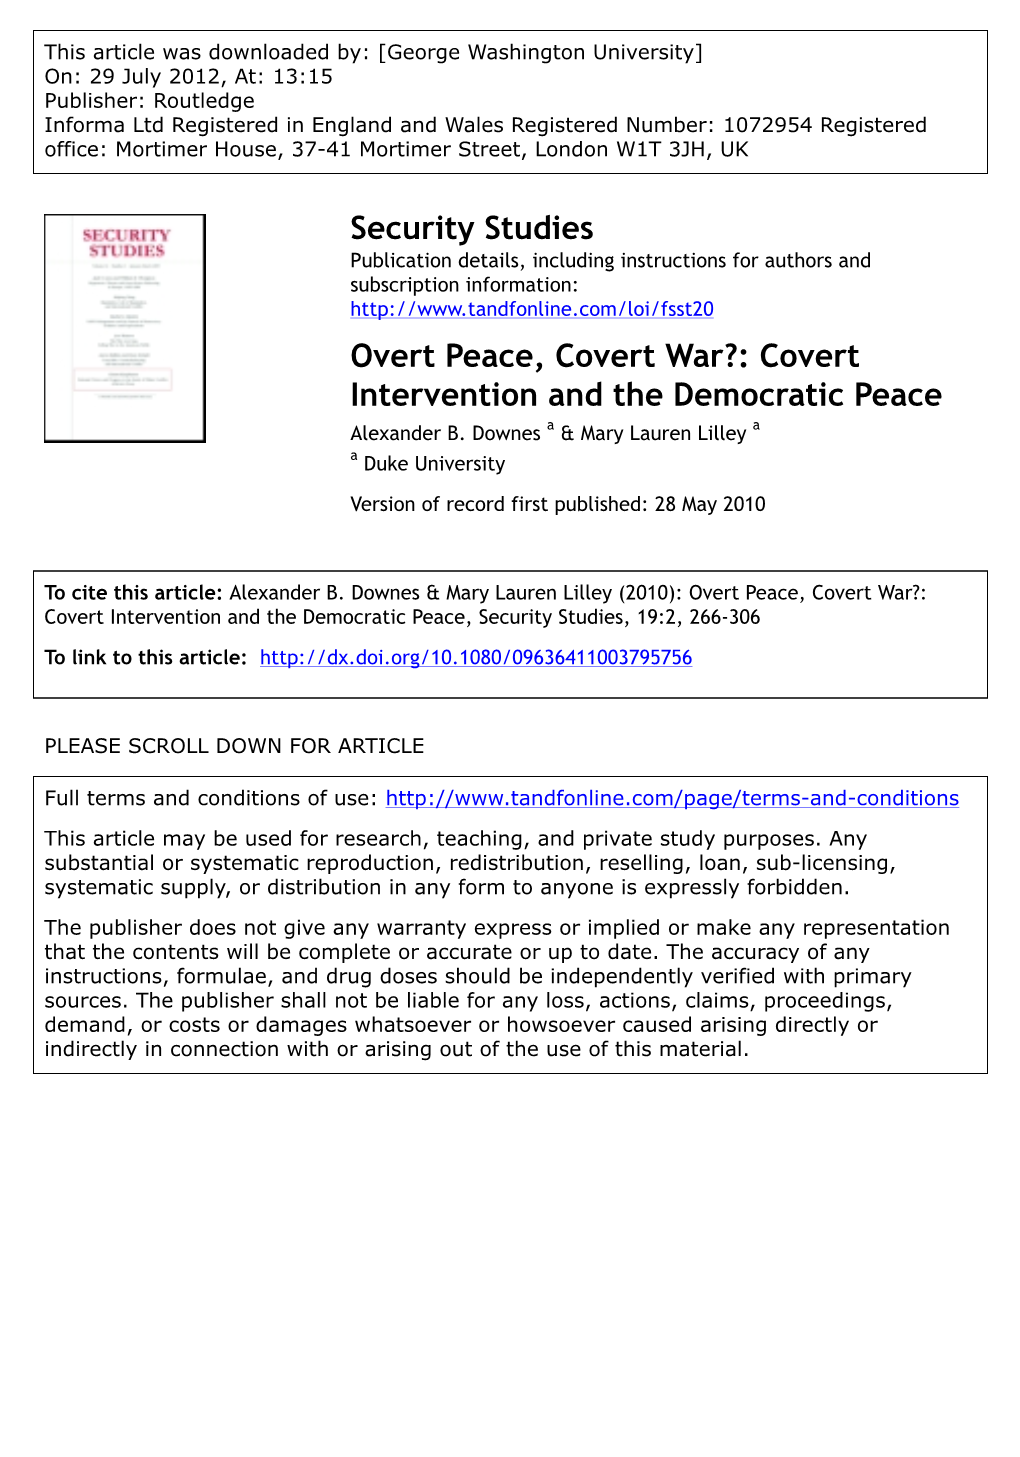 Overt Peace, Covert War?: Covert Intervention and the Democratic Peace Alexander B